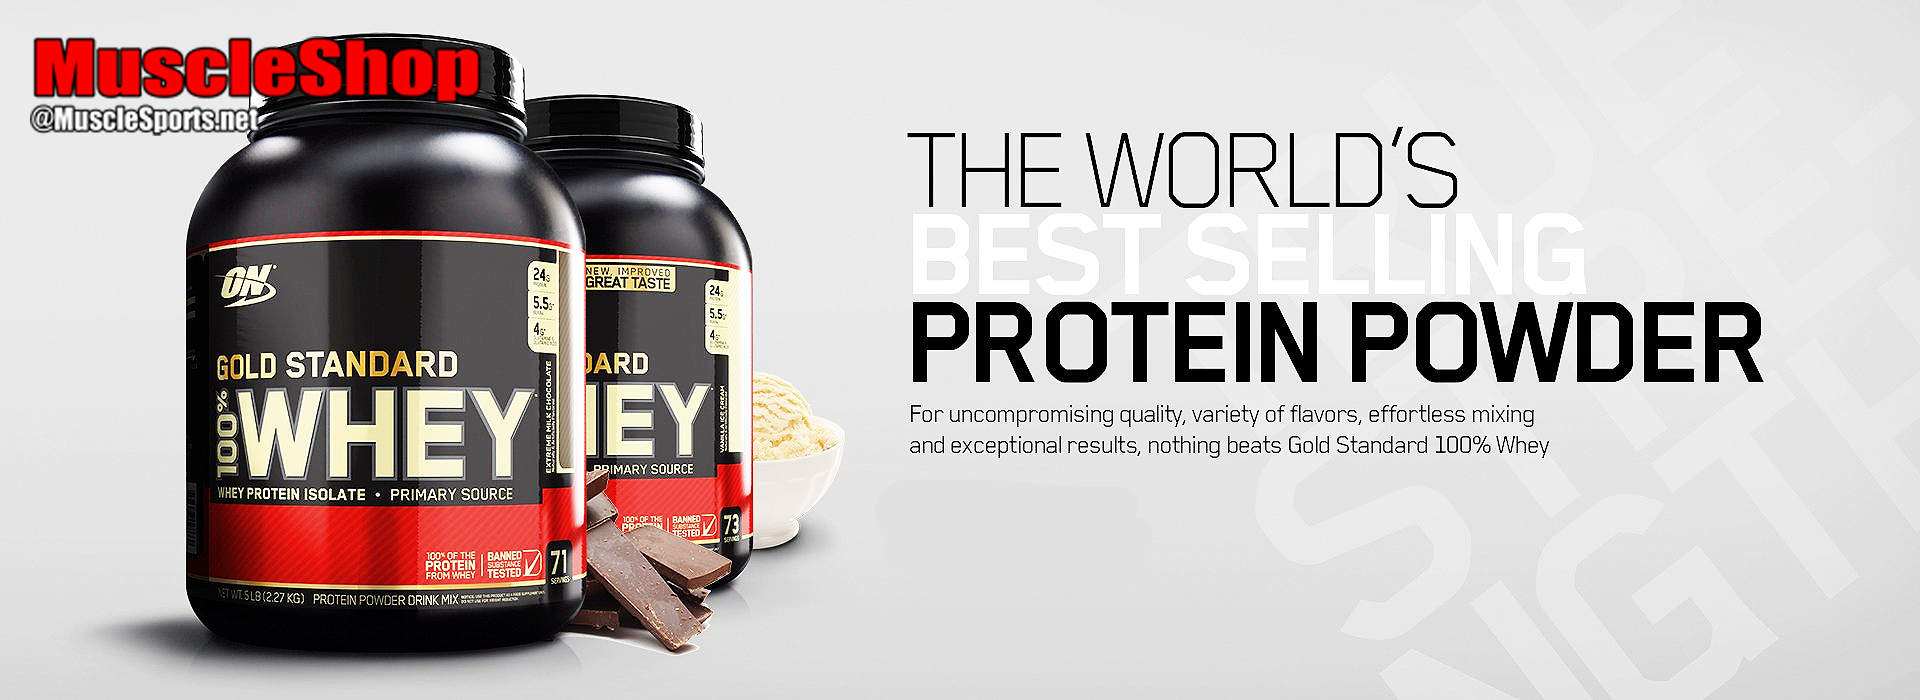 Optimu Nutrition's !00% Whey Protein - The #1 selling protein powder in the world.